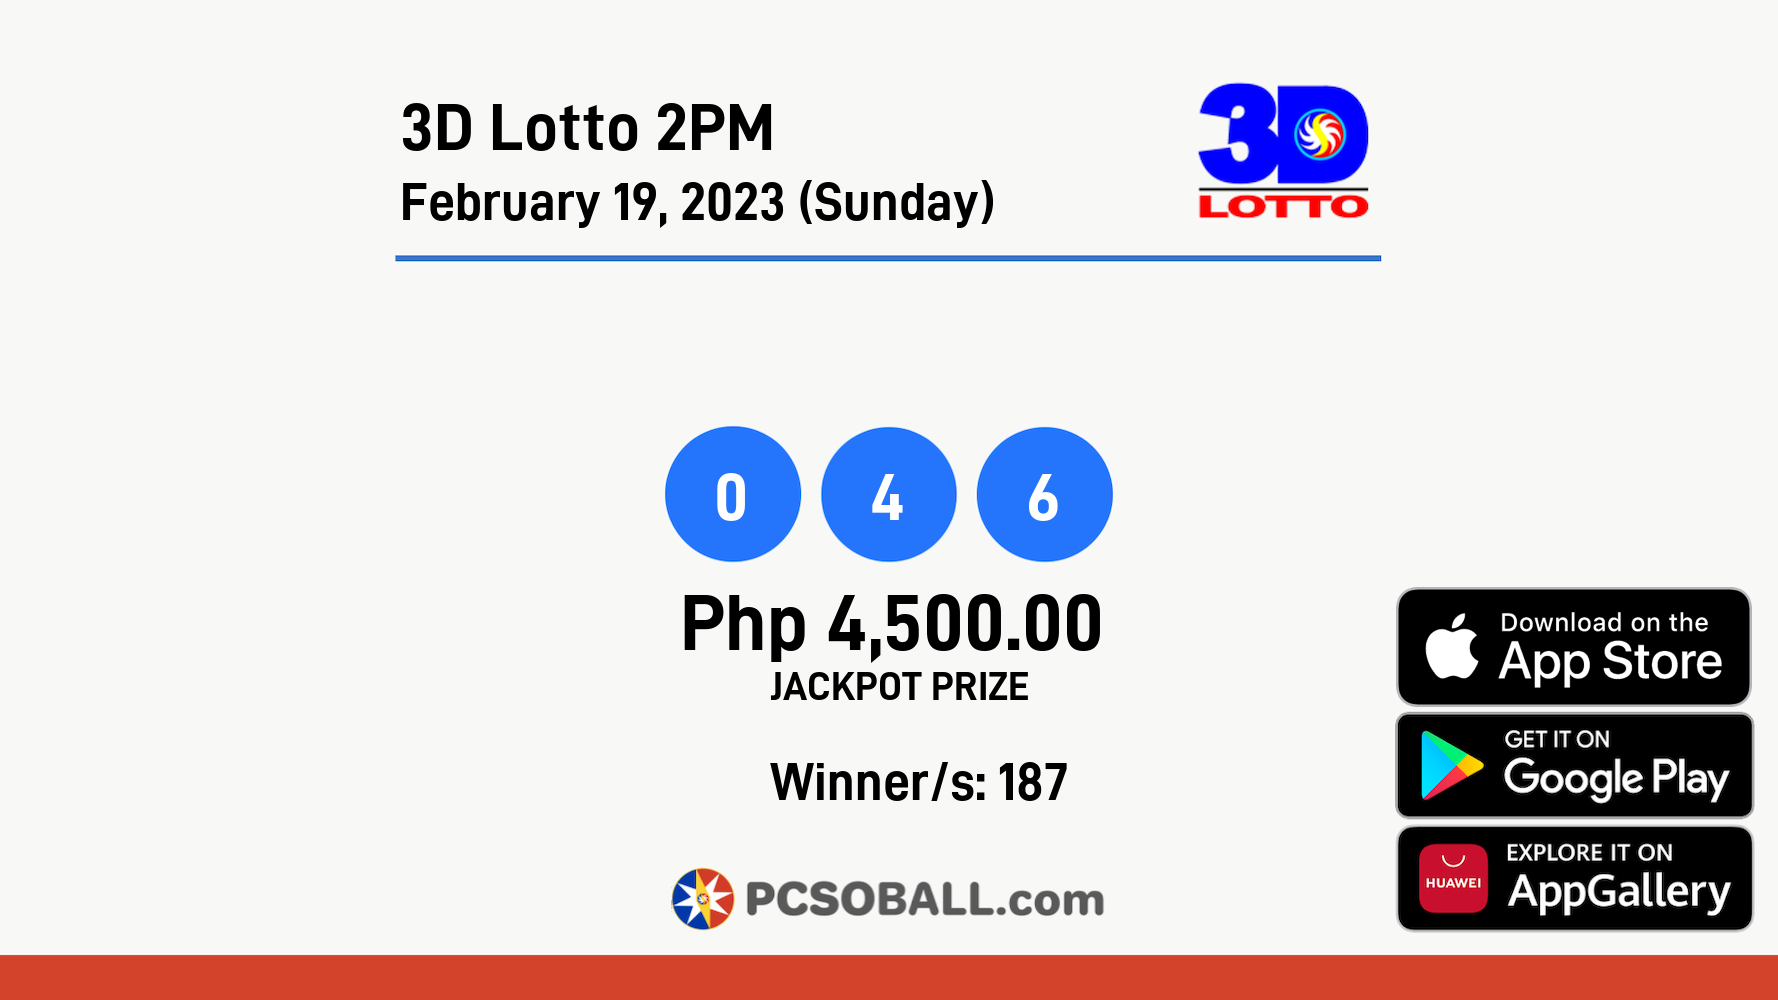 3D Lotto 2PM February 19, 2023 (Sunday) Result